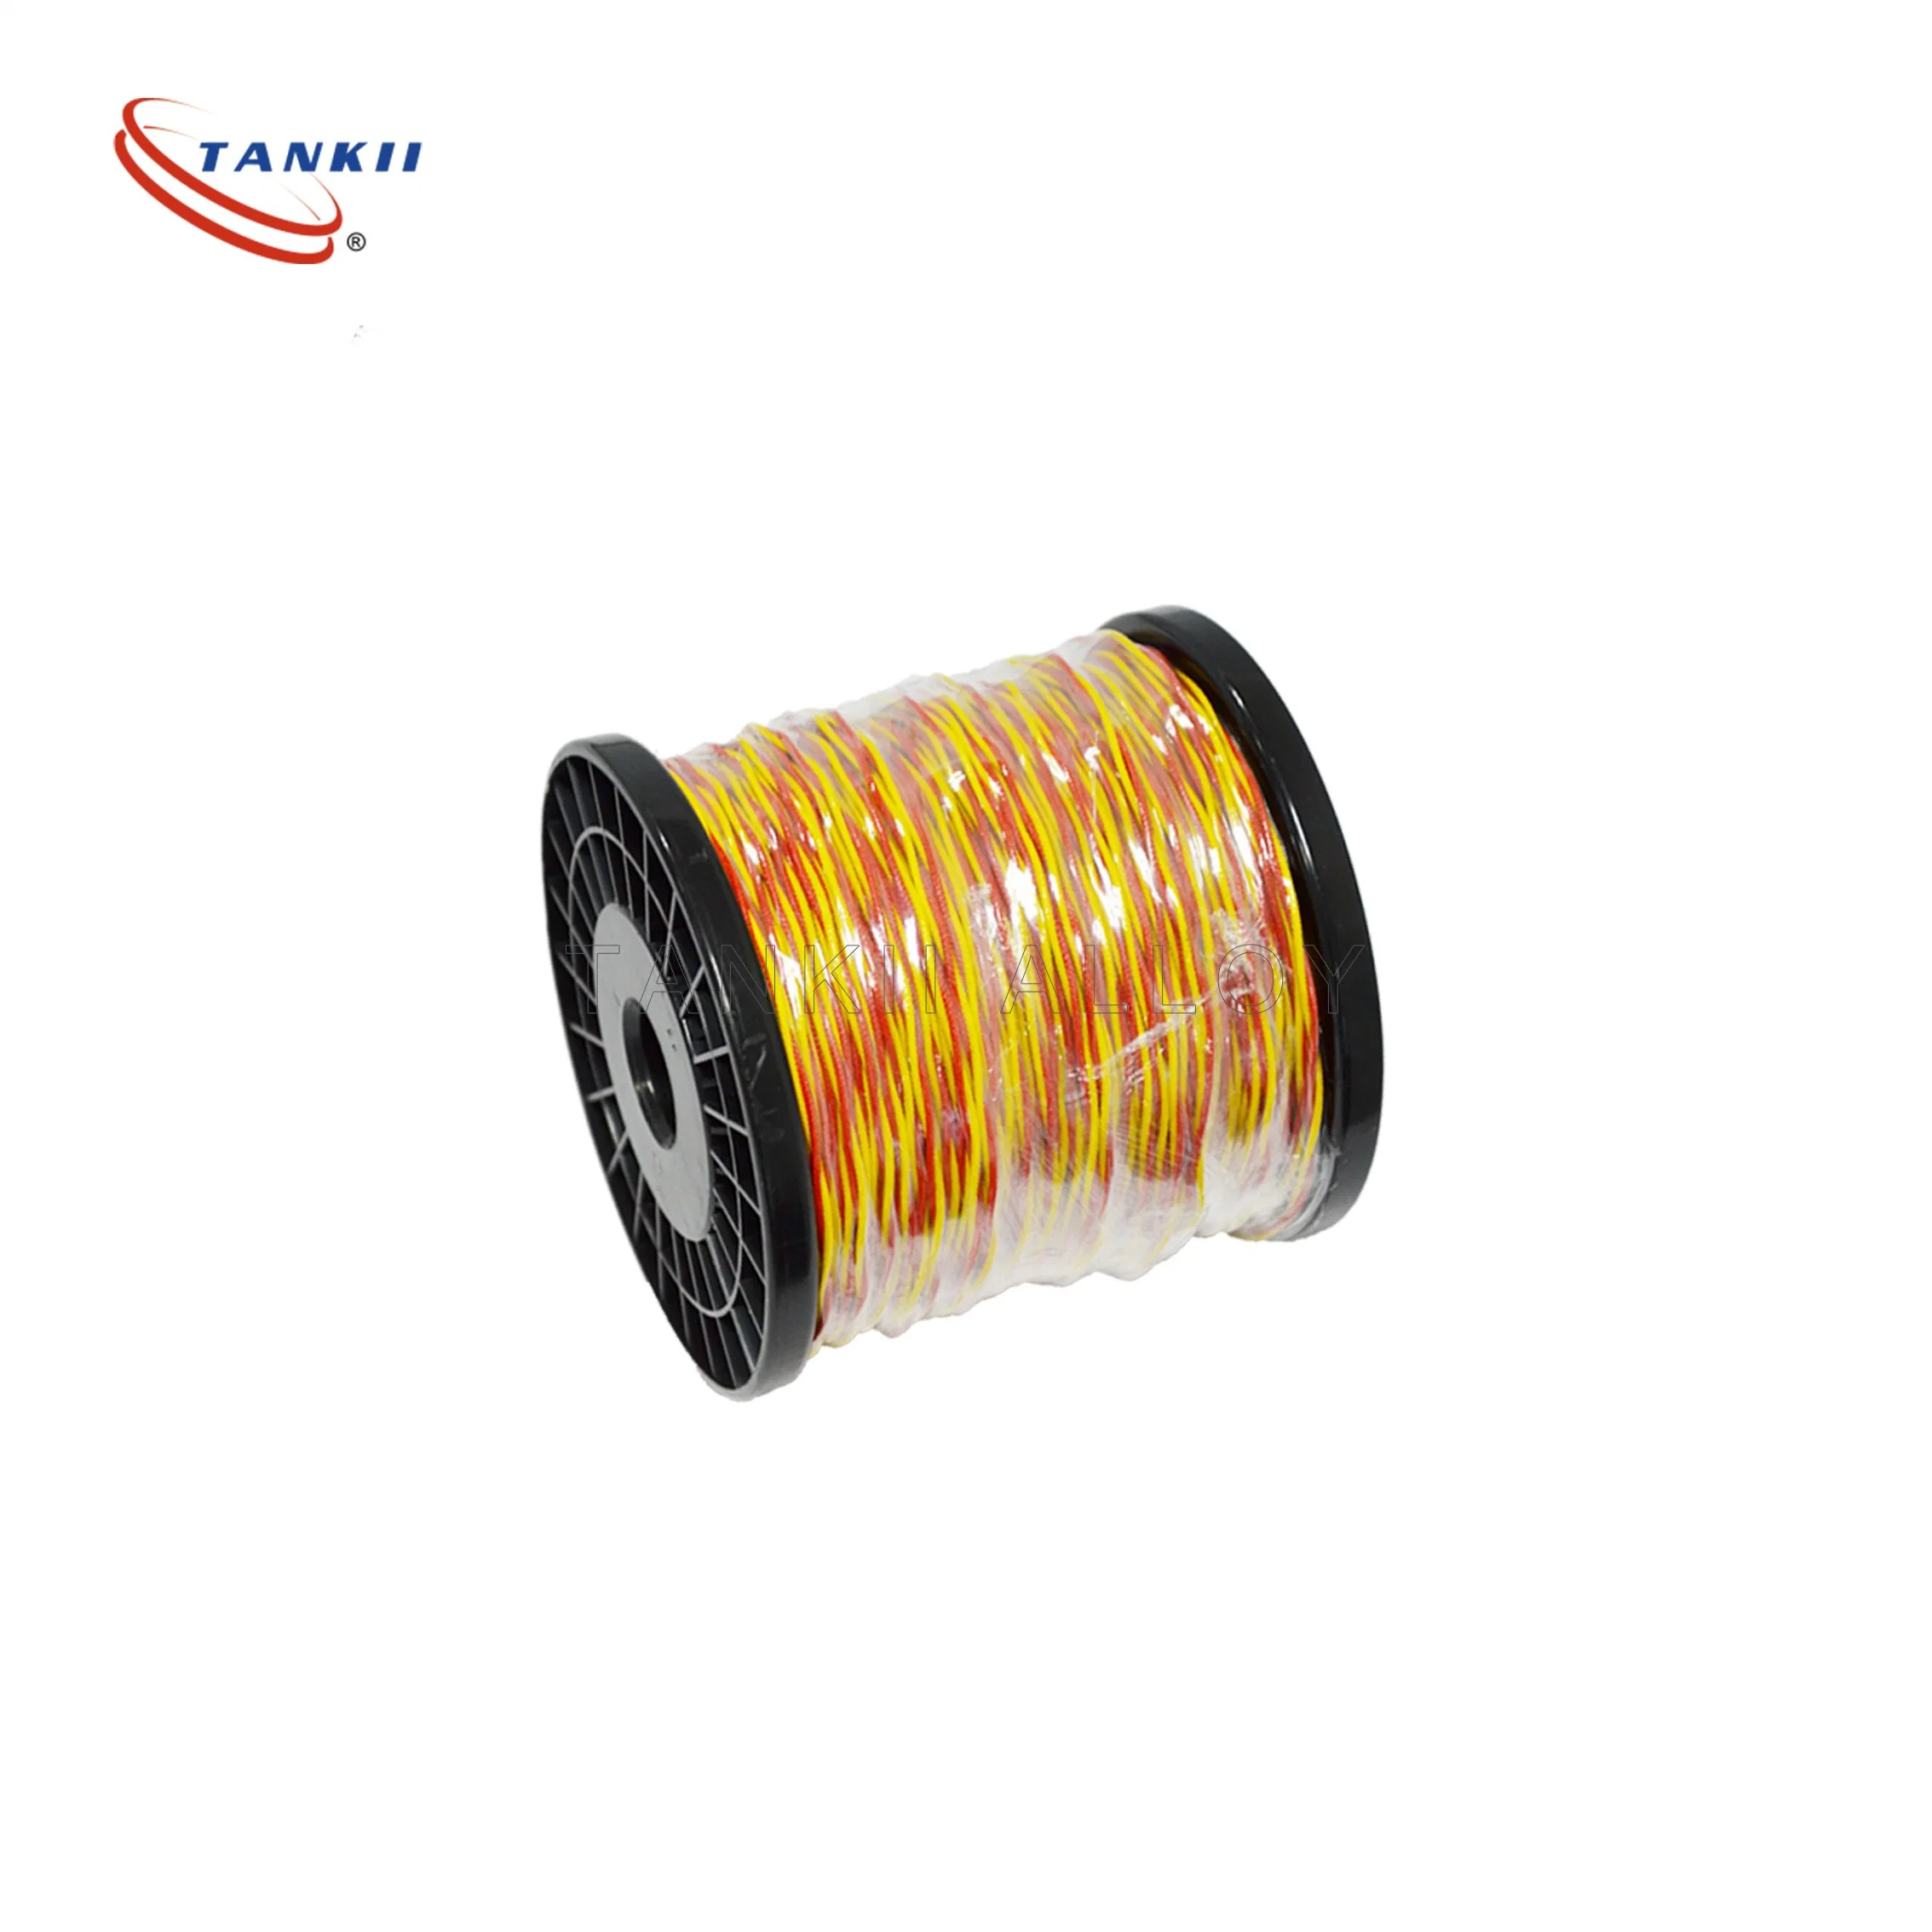 K type  2*0.711mm High Silica/fiberglass Insulation  Chromel/Alumel thermocouple Extension cable/wire